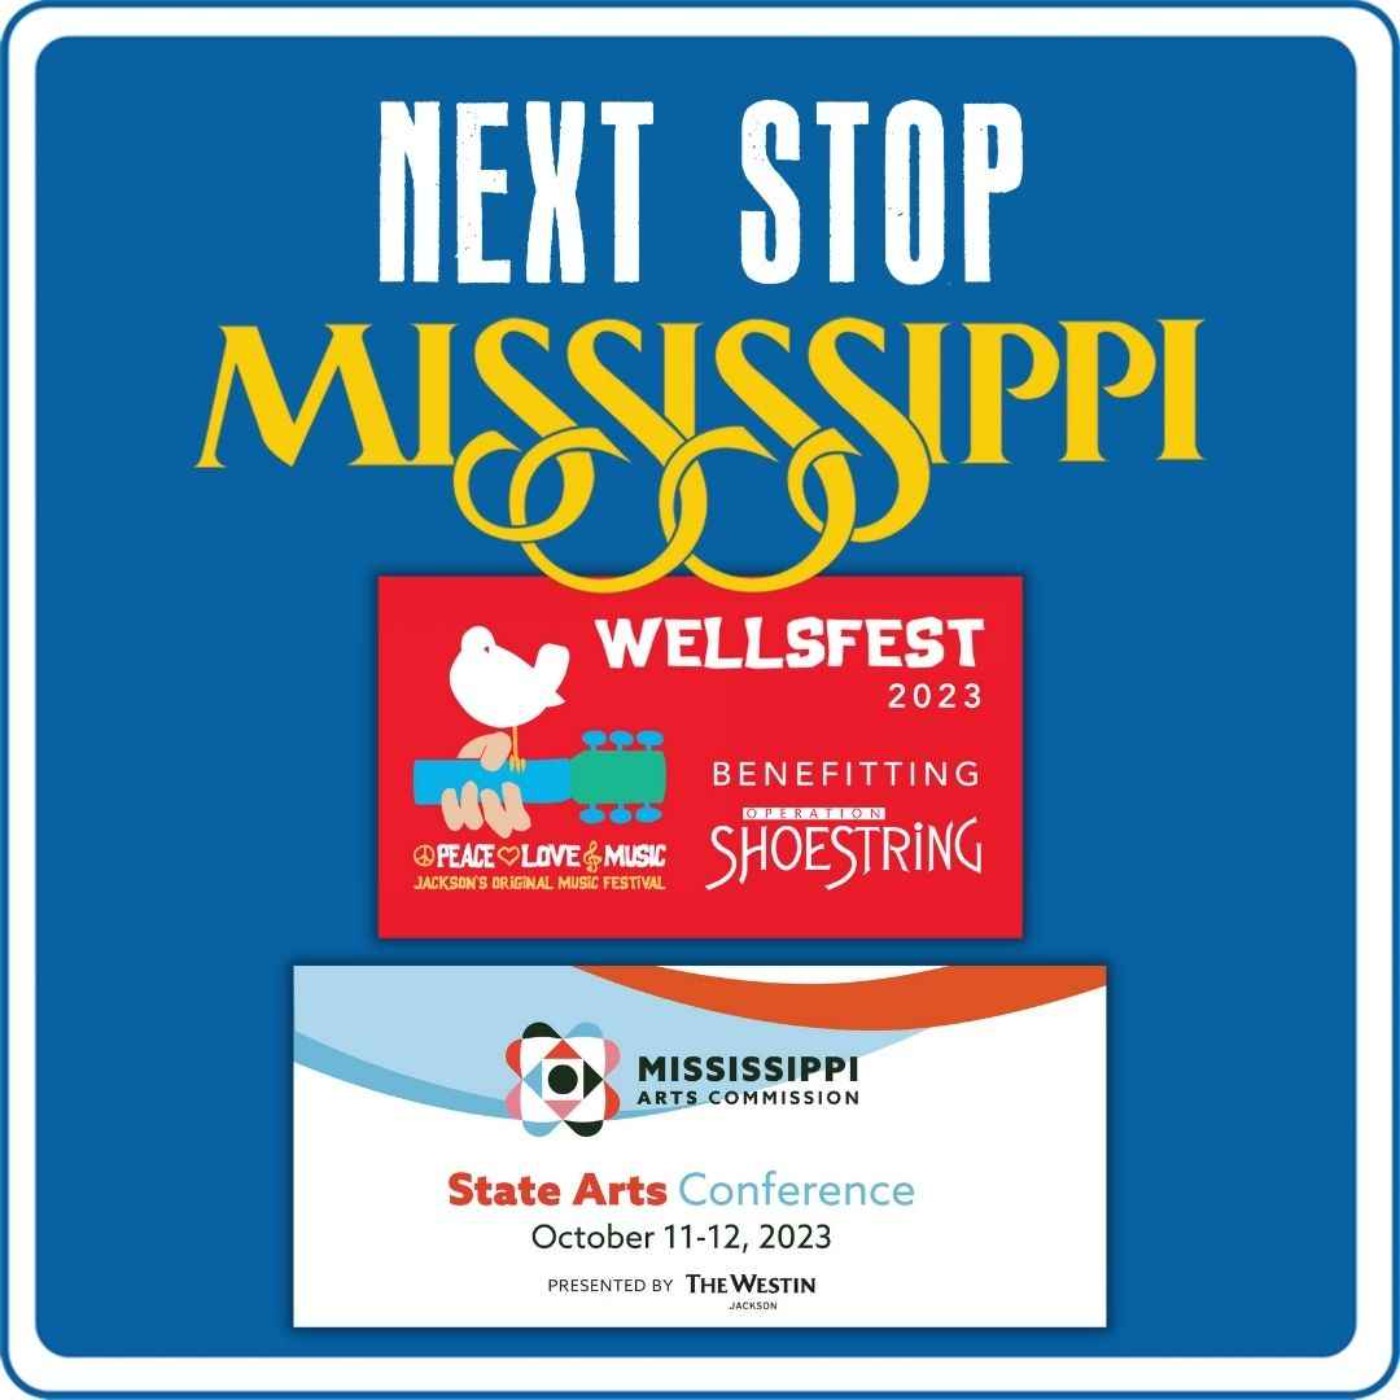 cover art for Next Stop MS | WellsFest 2023 & MS Arts Commission State Arts Conference 